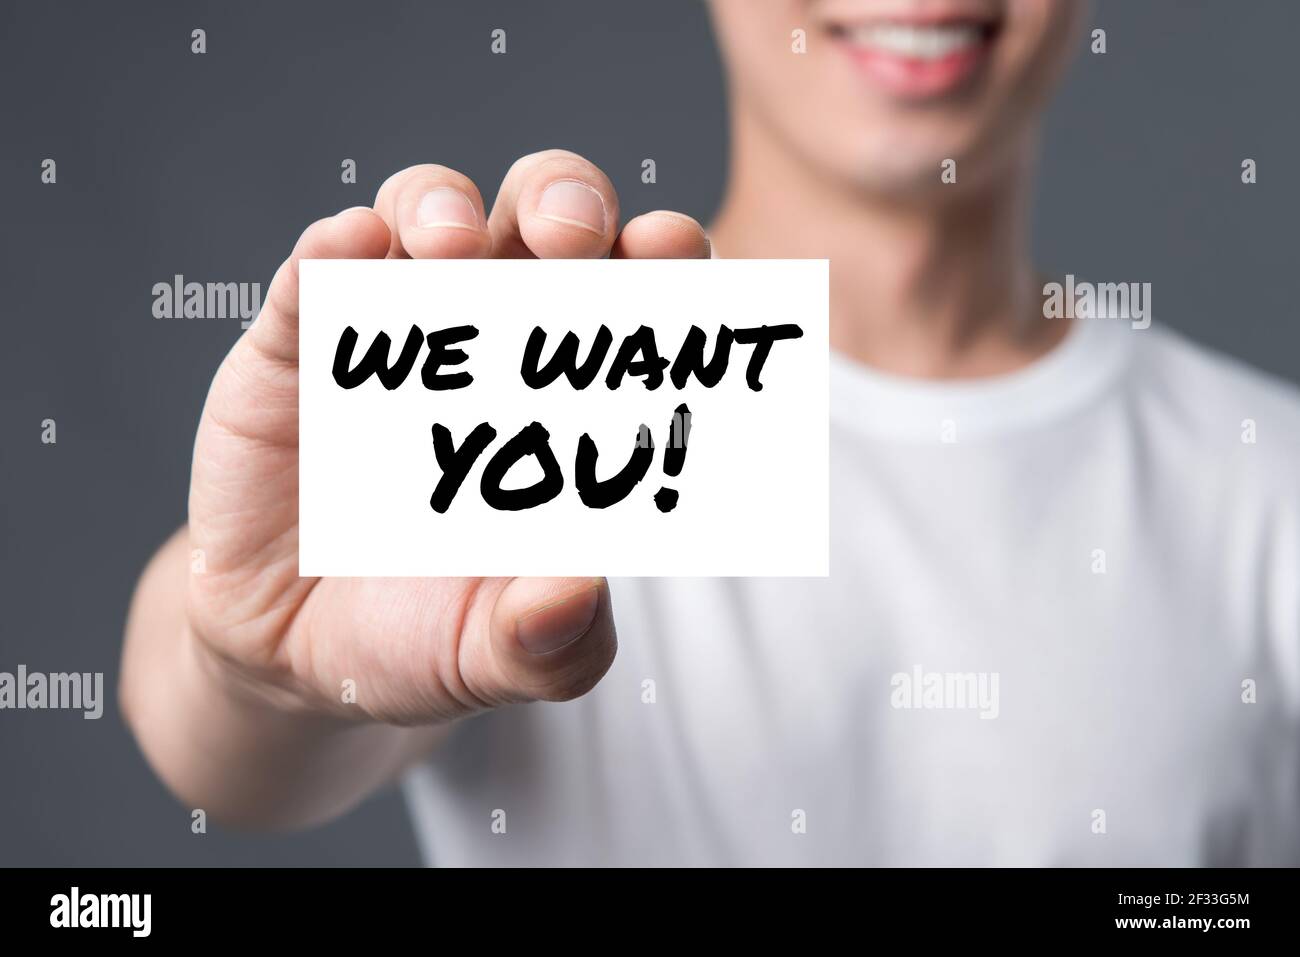 WE WANT YOU! message on the card shown by a man Stock Photo